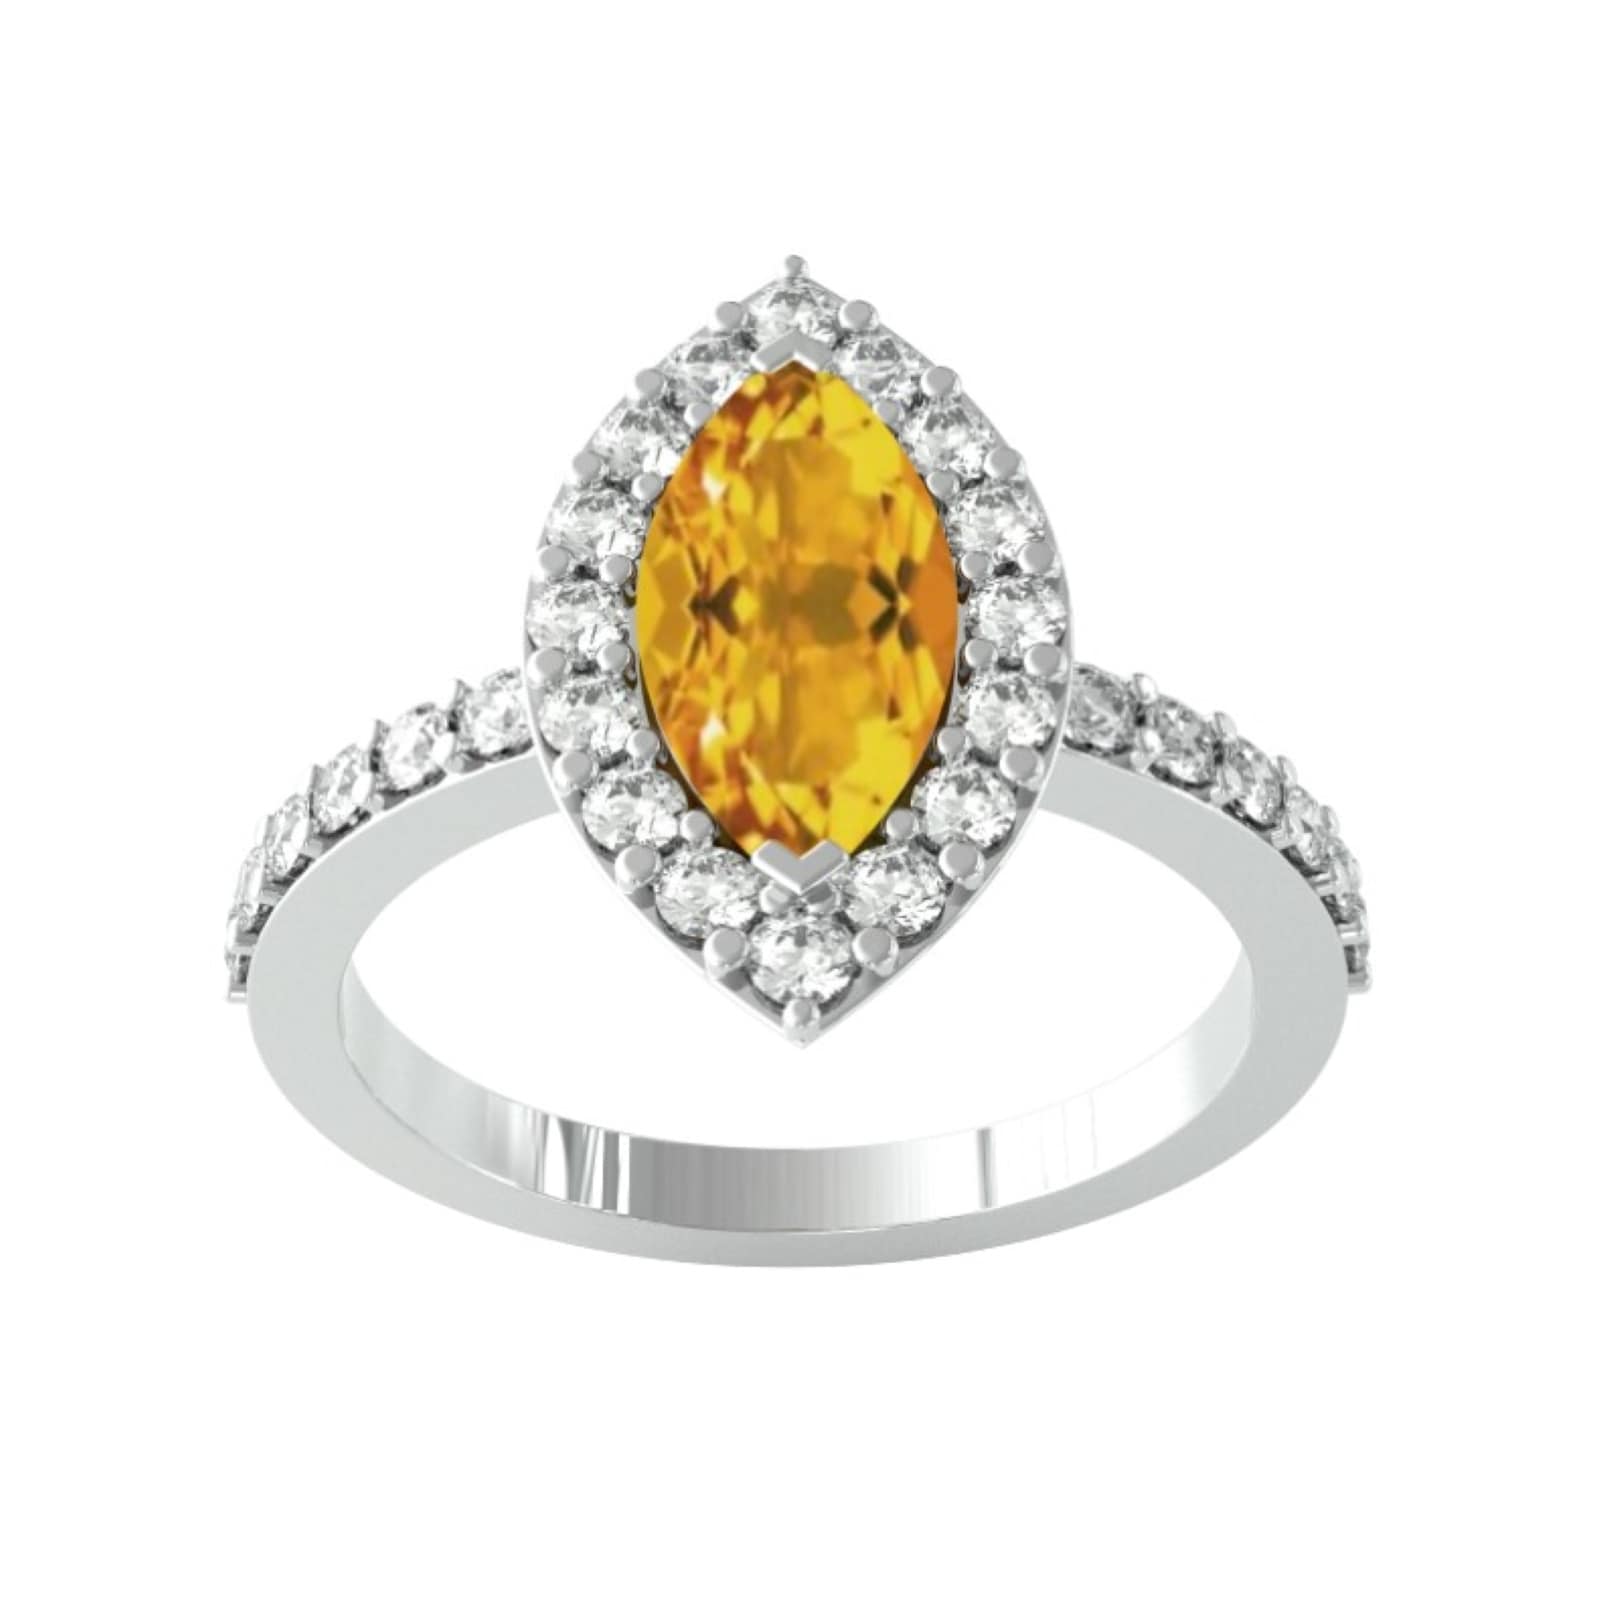 9ct White Gold Marquise Cut Citrine & Diamond Ring - Ring Size A.5